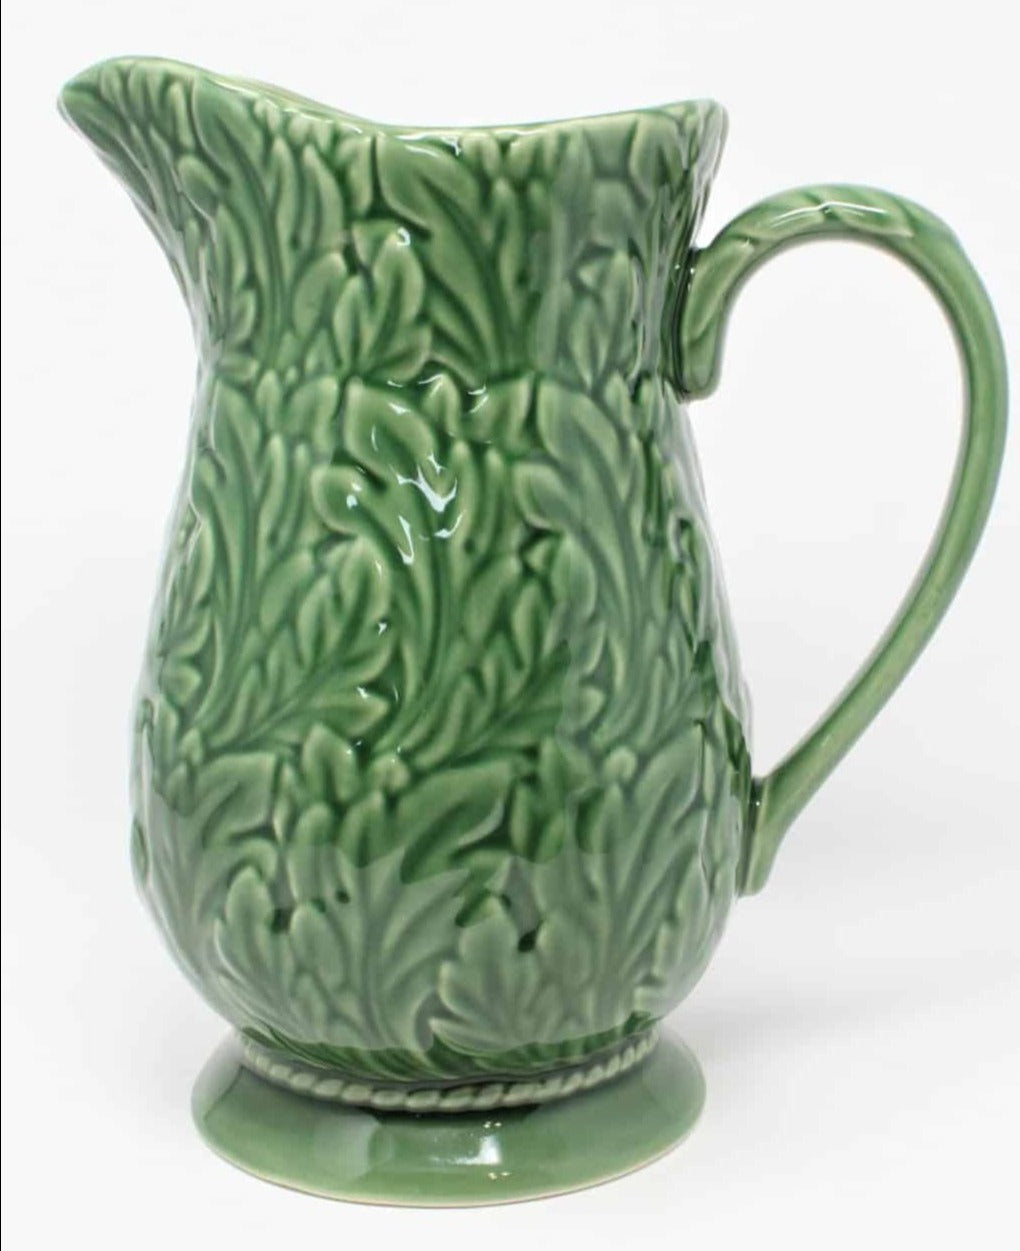 Pitcher, Lenox, Aerin Lauder Thicket, Green Leaves, Ceramic